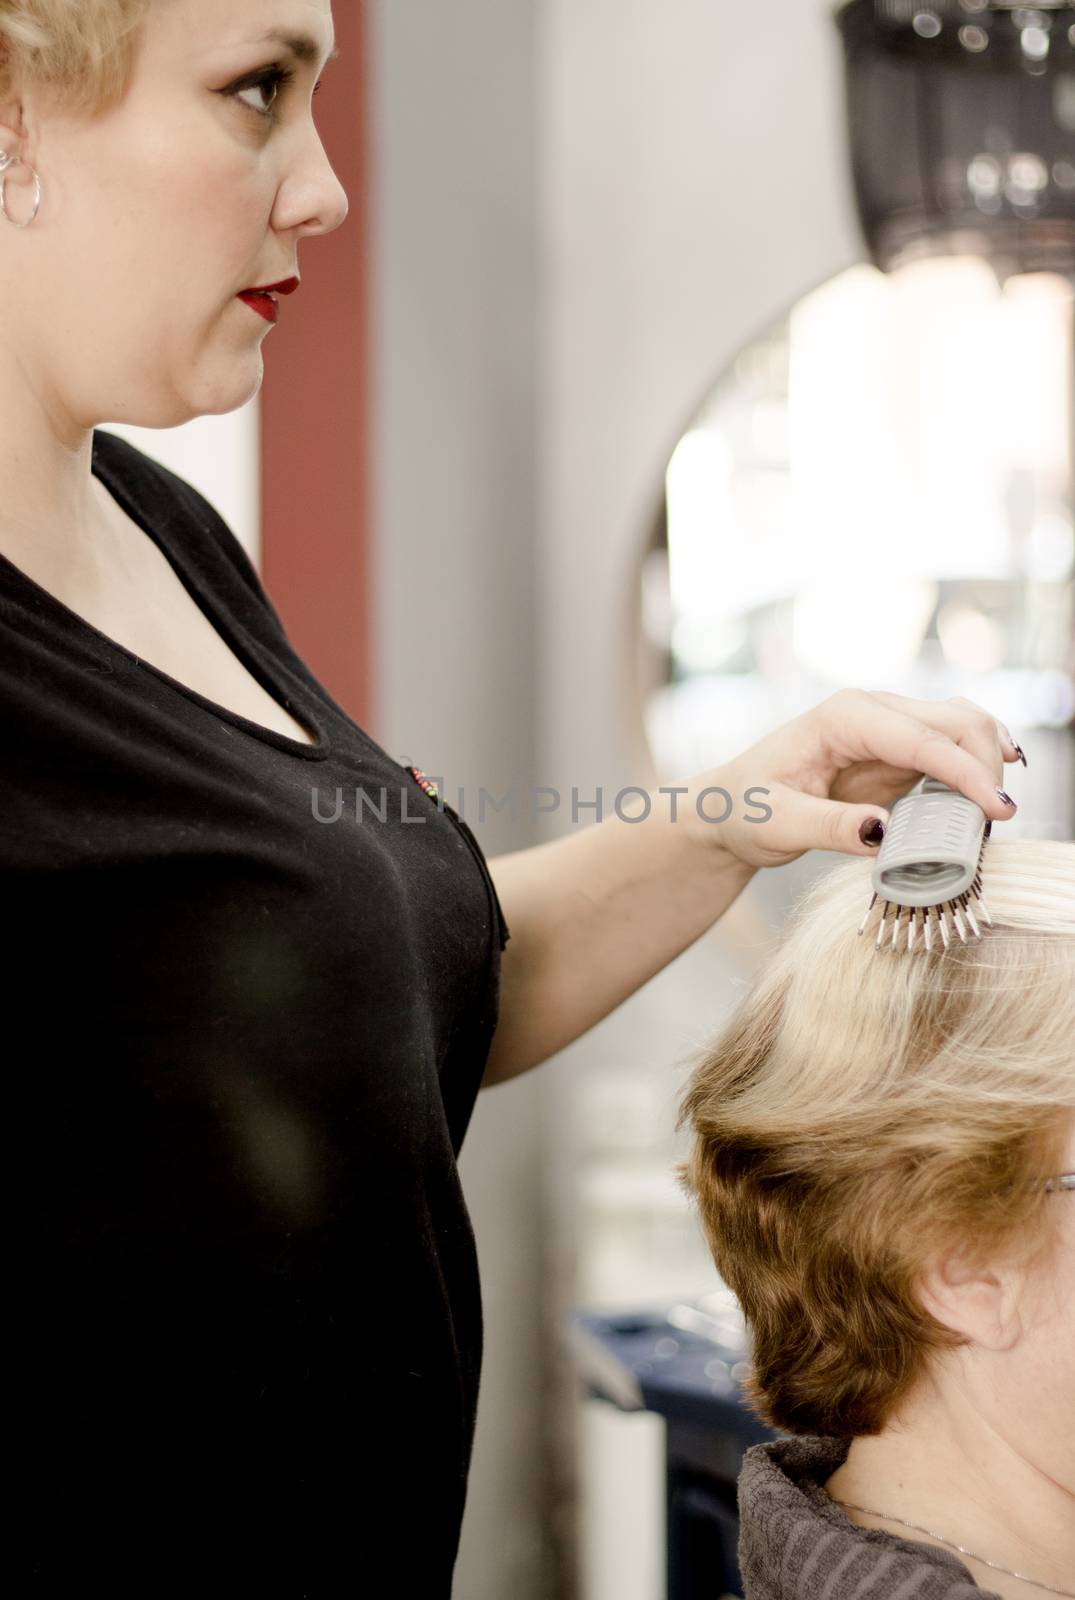 Hairdresser in positive attitude brushing the hair of a client